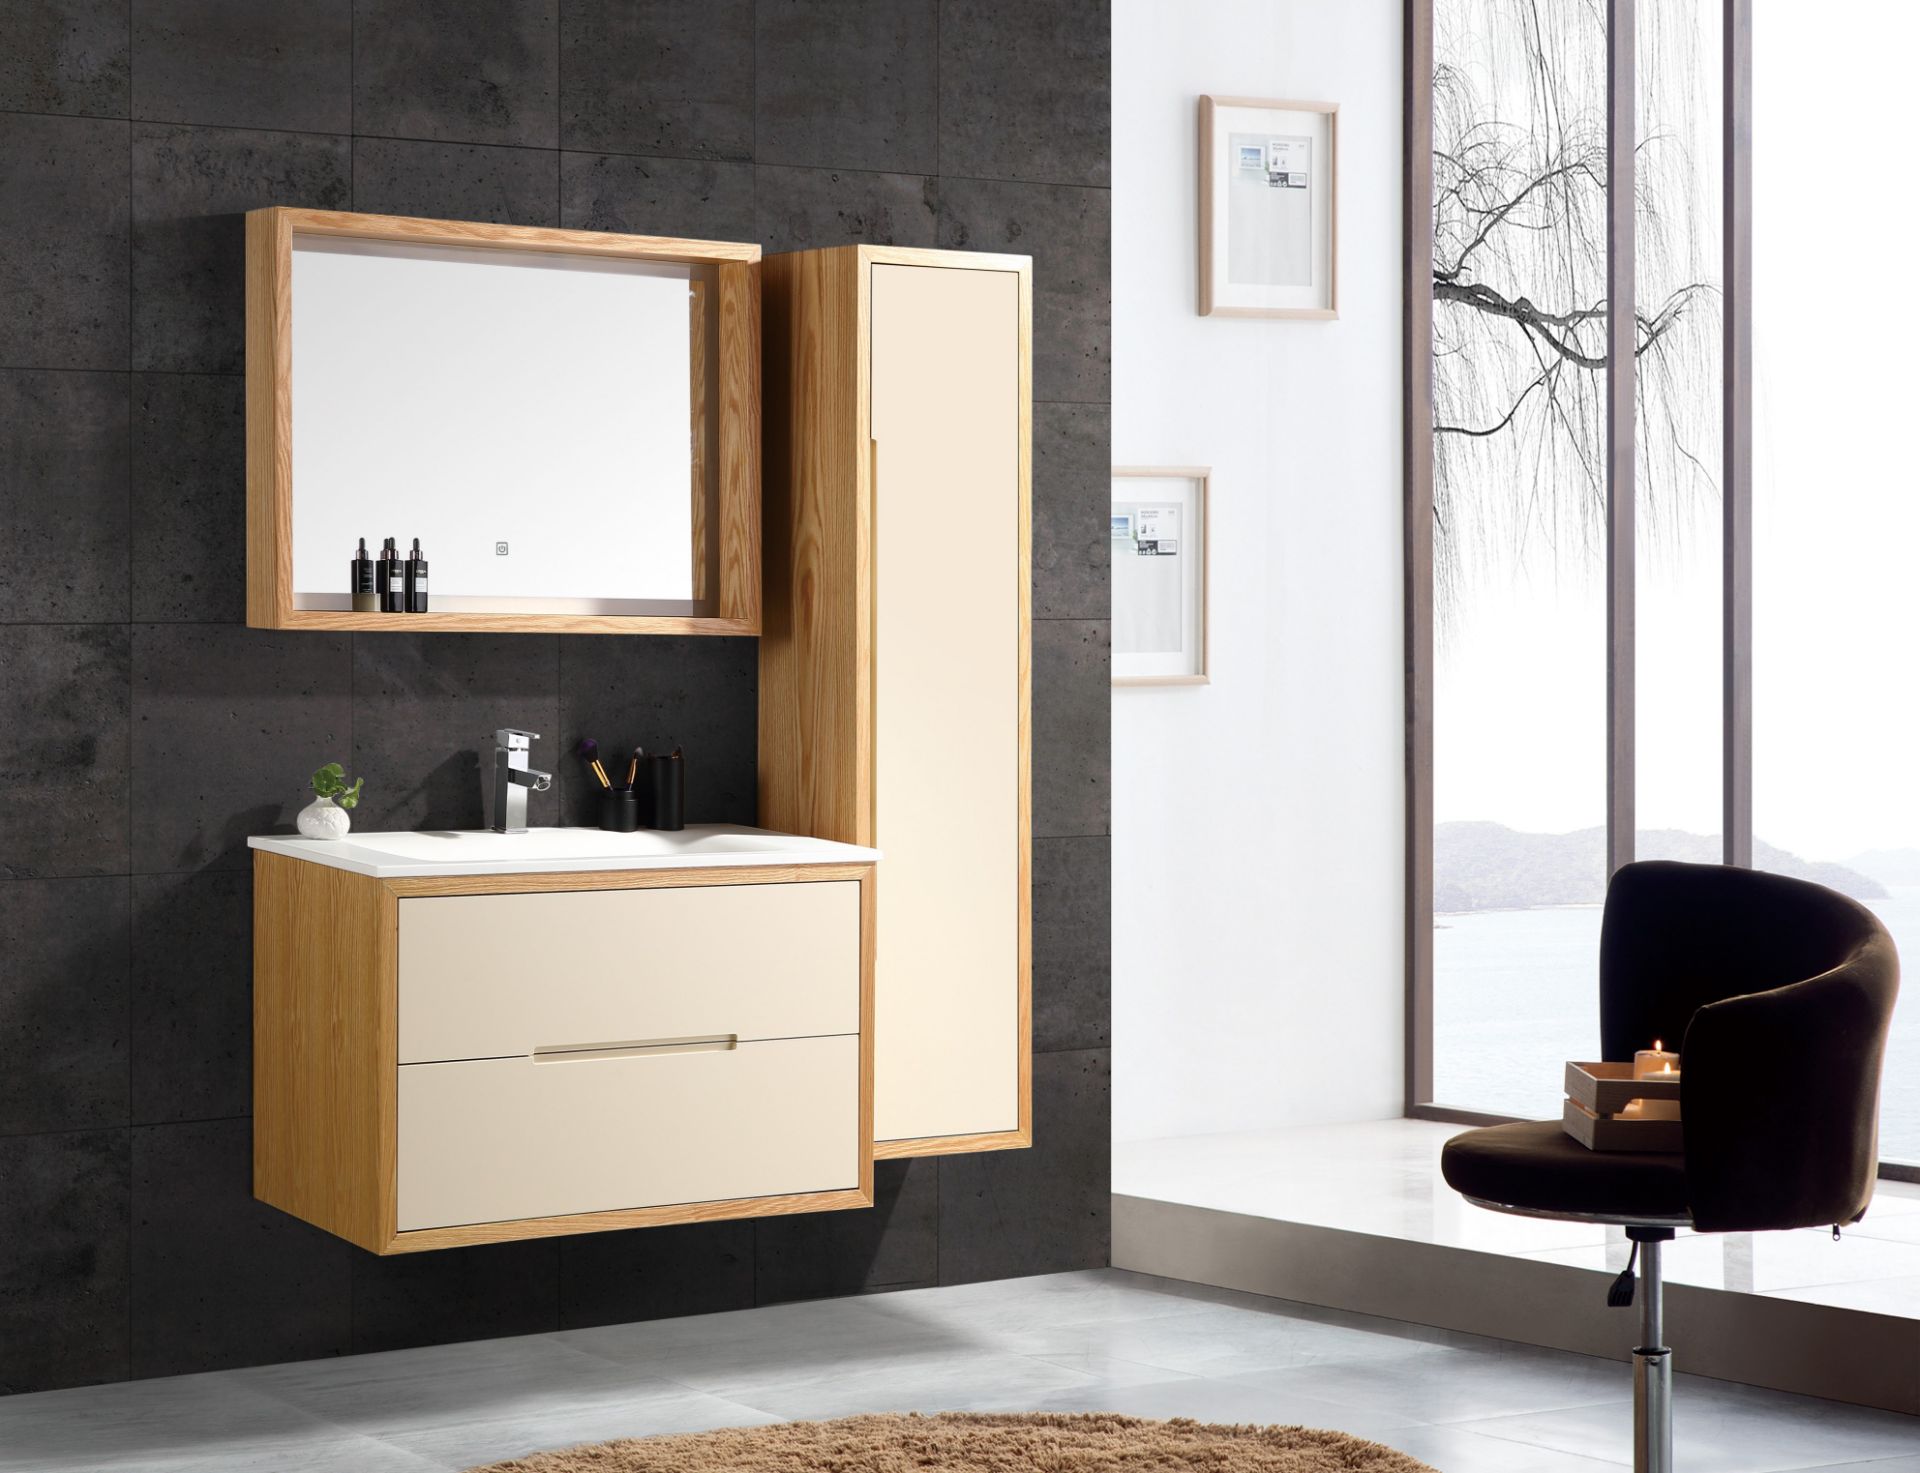 BRAND NEW Complete Vanity Unit Set in Beige with fixtures and fittings RRP £799.99 *NO VAT* - Image 2 of 5